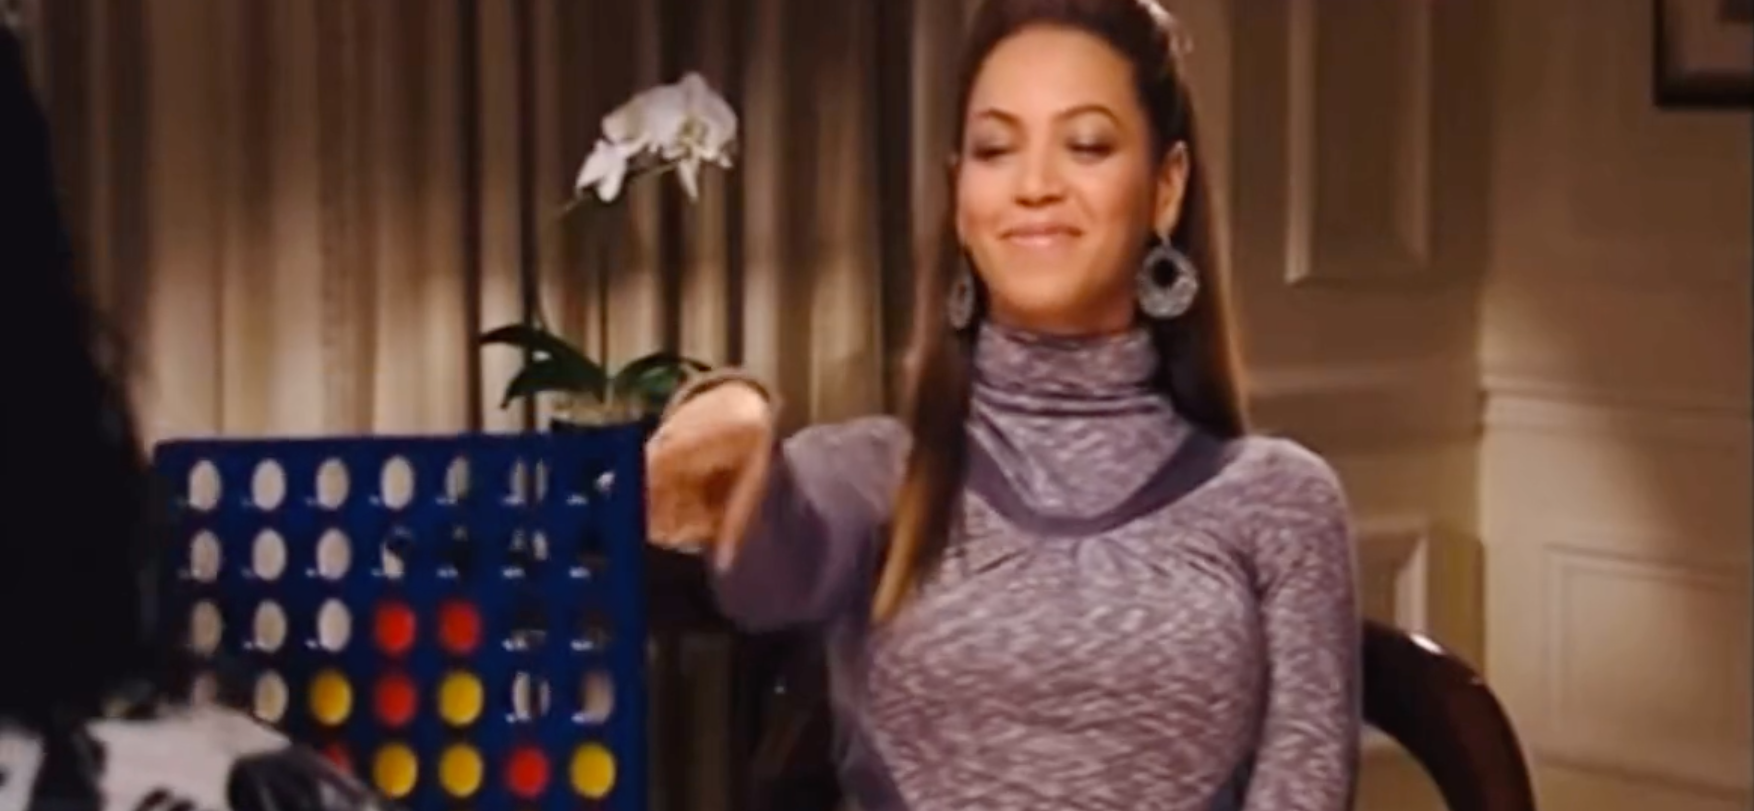 Character in a turtleneck plays Connect Four in a movie scene